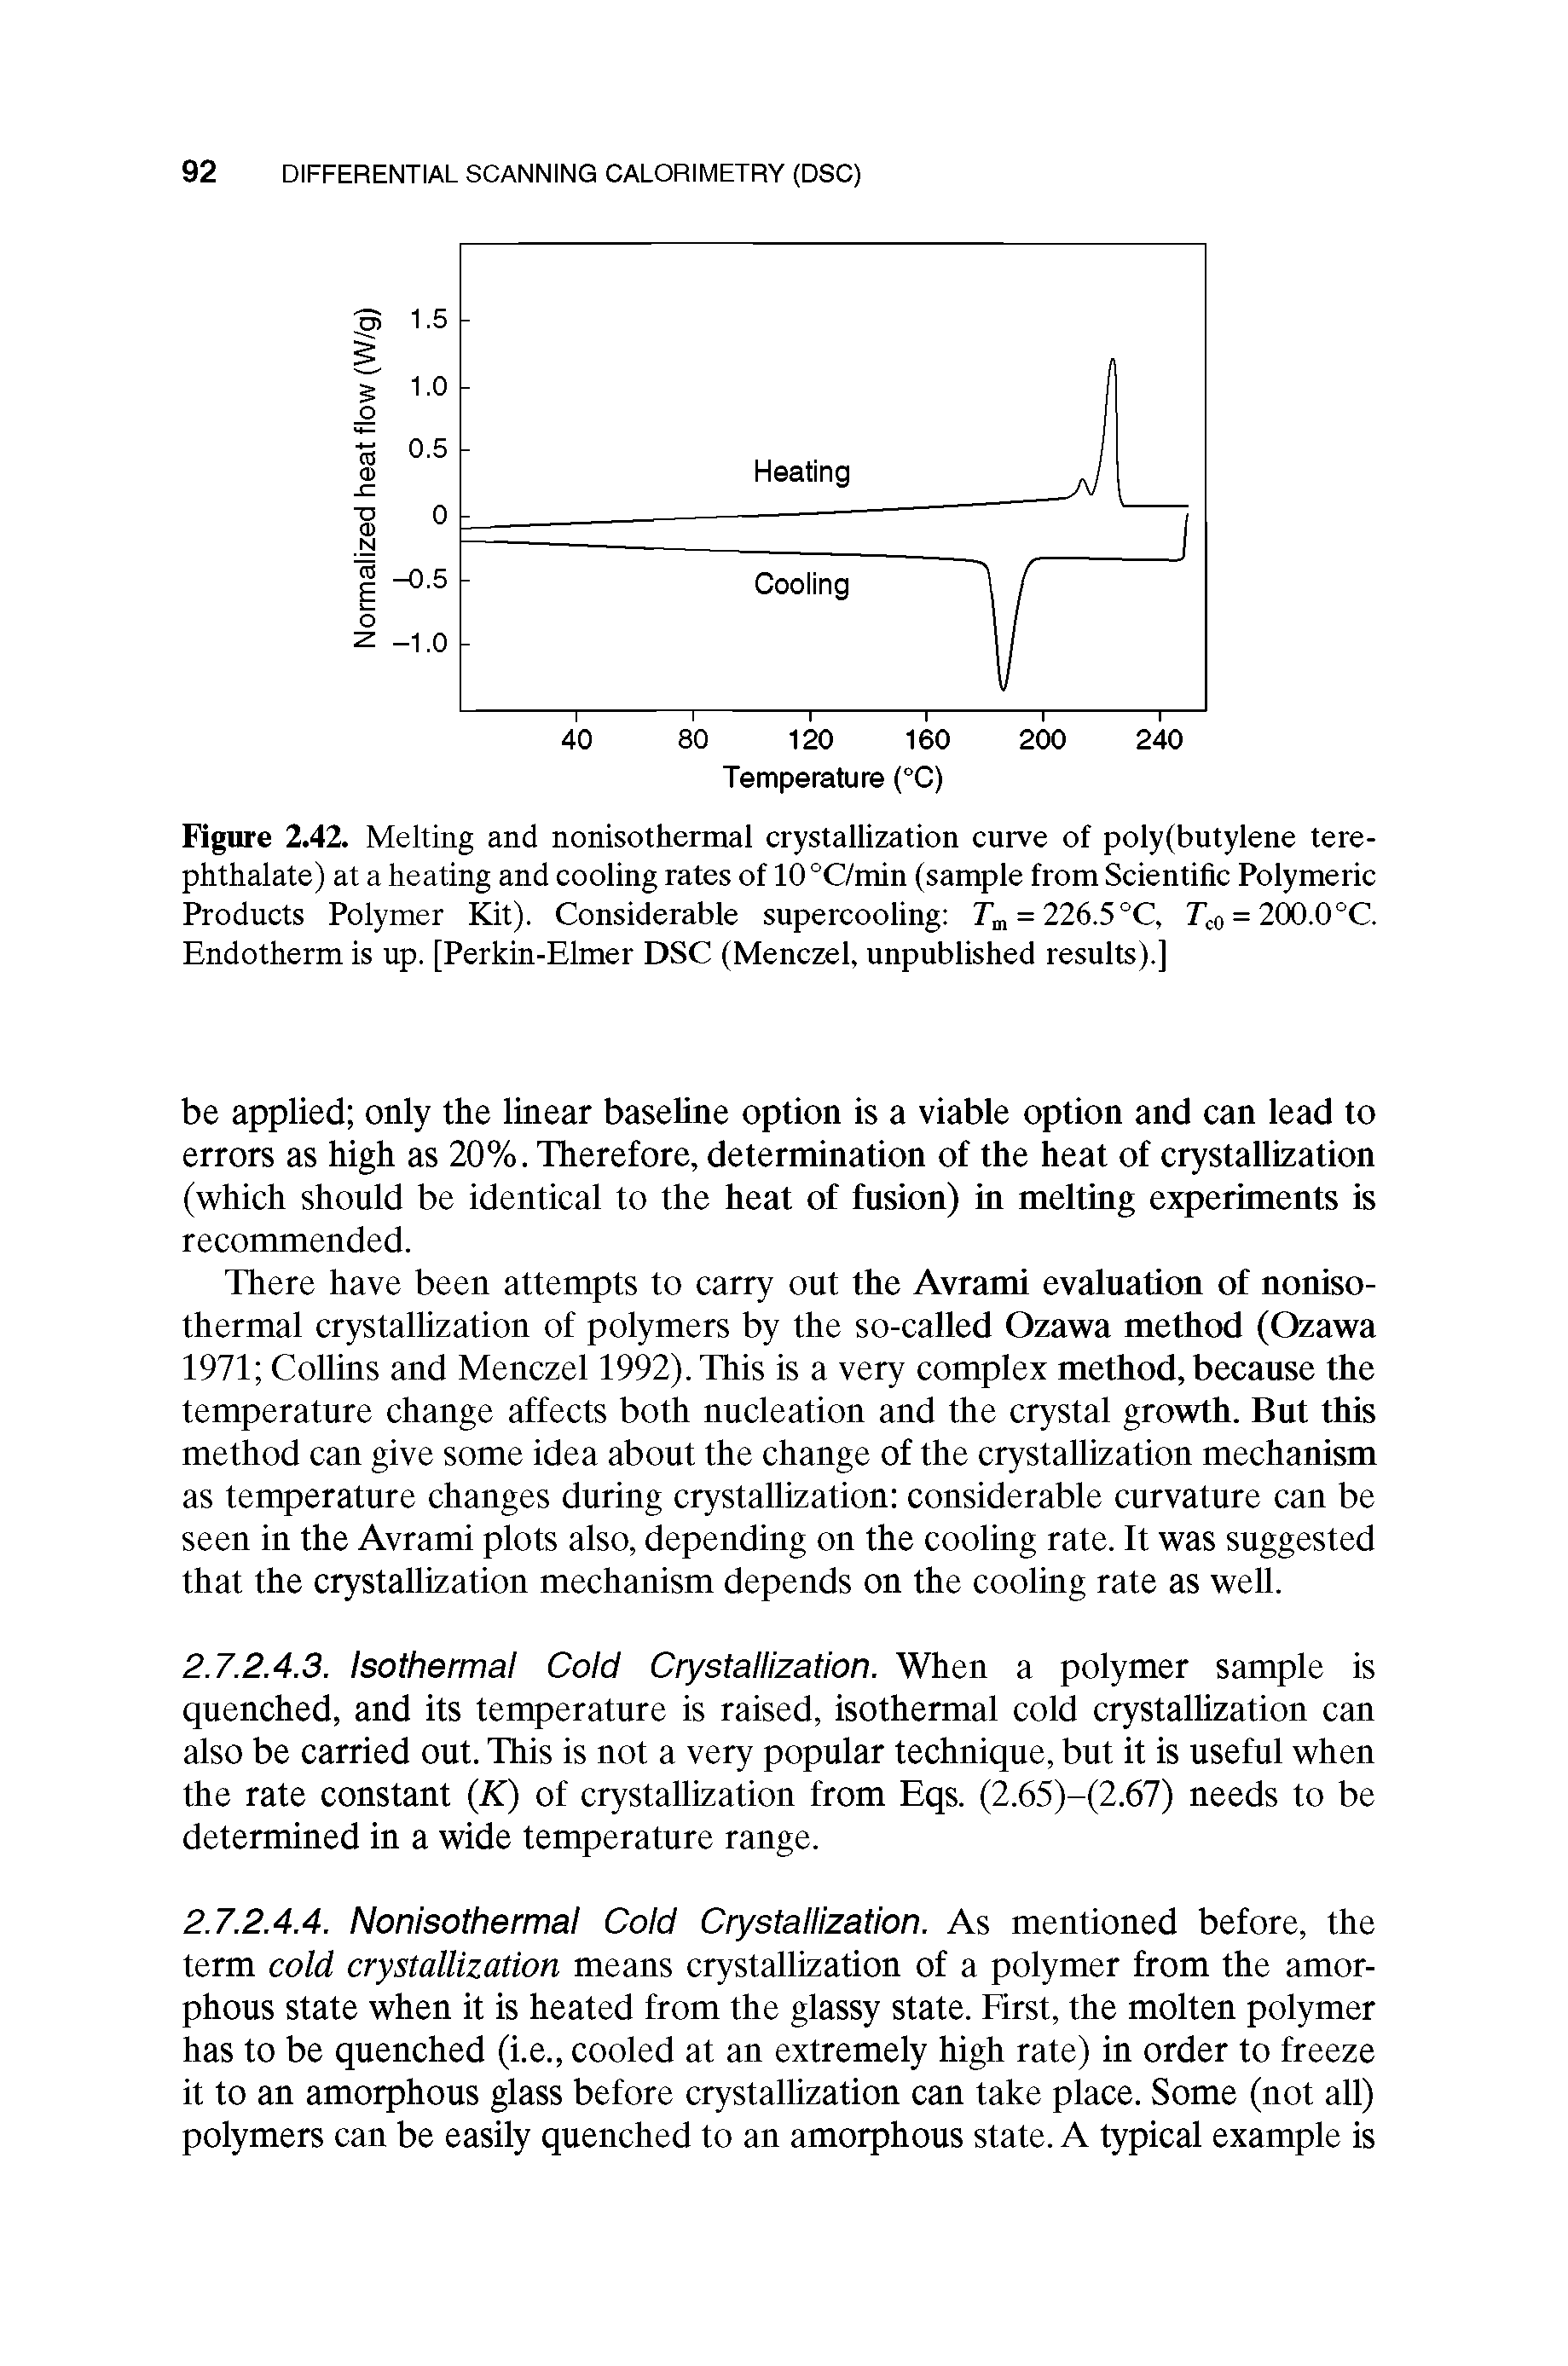 Figure 2.42. Melting and nonisothermal crystallization curve of poly(butylene tere-phthalate) at a heating and cooling rates of 10°C/min (sample from Scientific Polymeric Products Polymer Kit). Considerable supercooling r = 226.5°C, = 2(X).0°C.